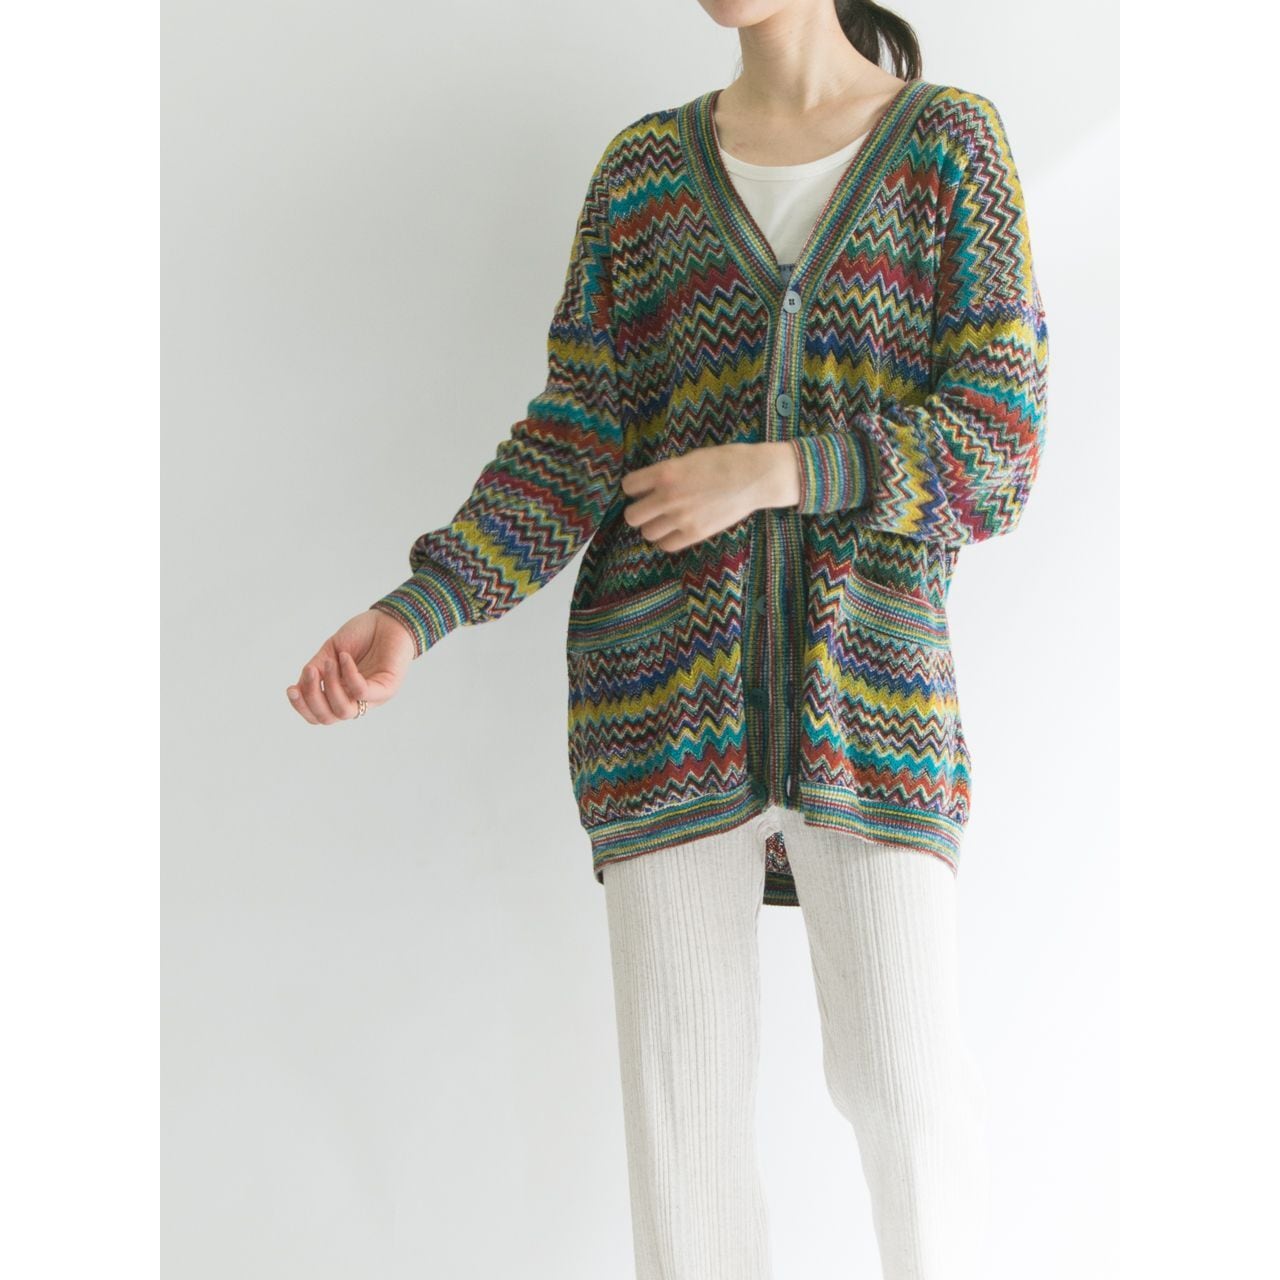 MISSONI】Made in Italy ziigzag knit cardigan（ミッソーニ